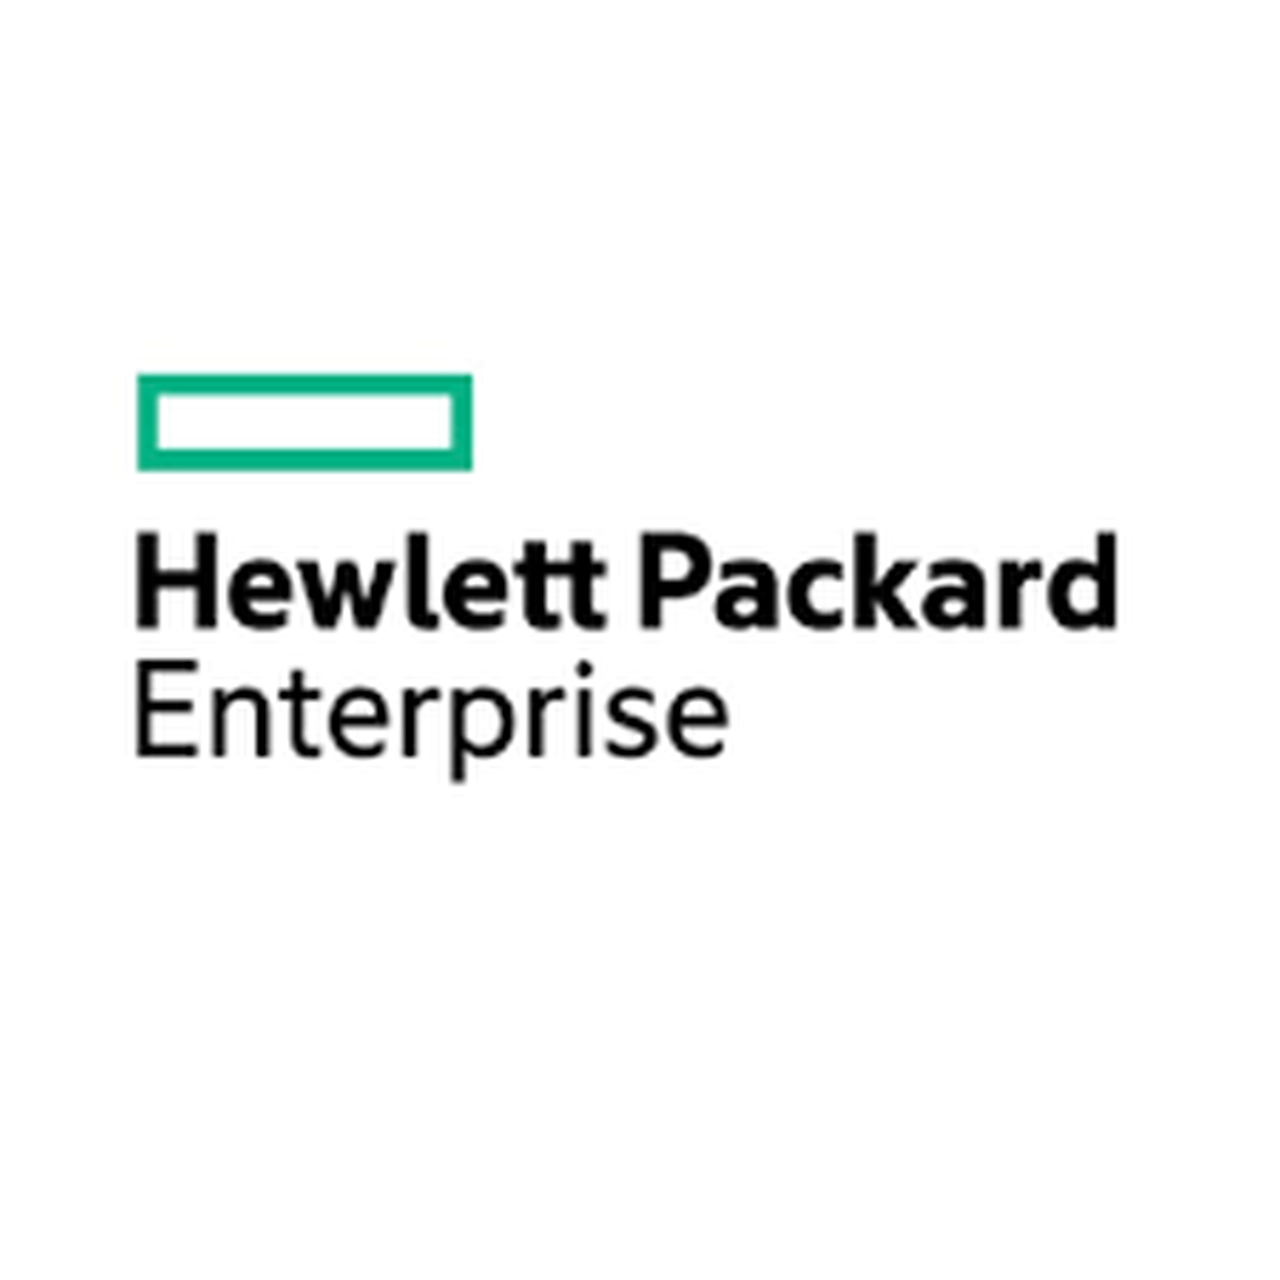 HPE DL580 Gen10 Xeon-G 6148 Kit Factory integrated